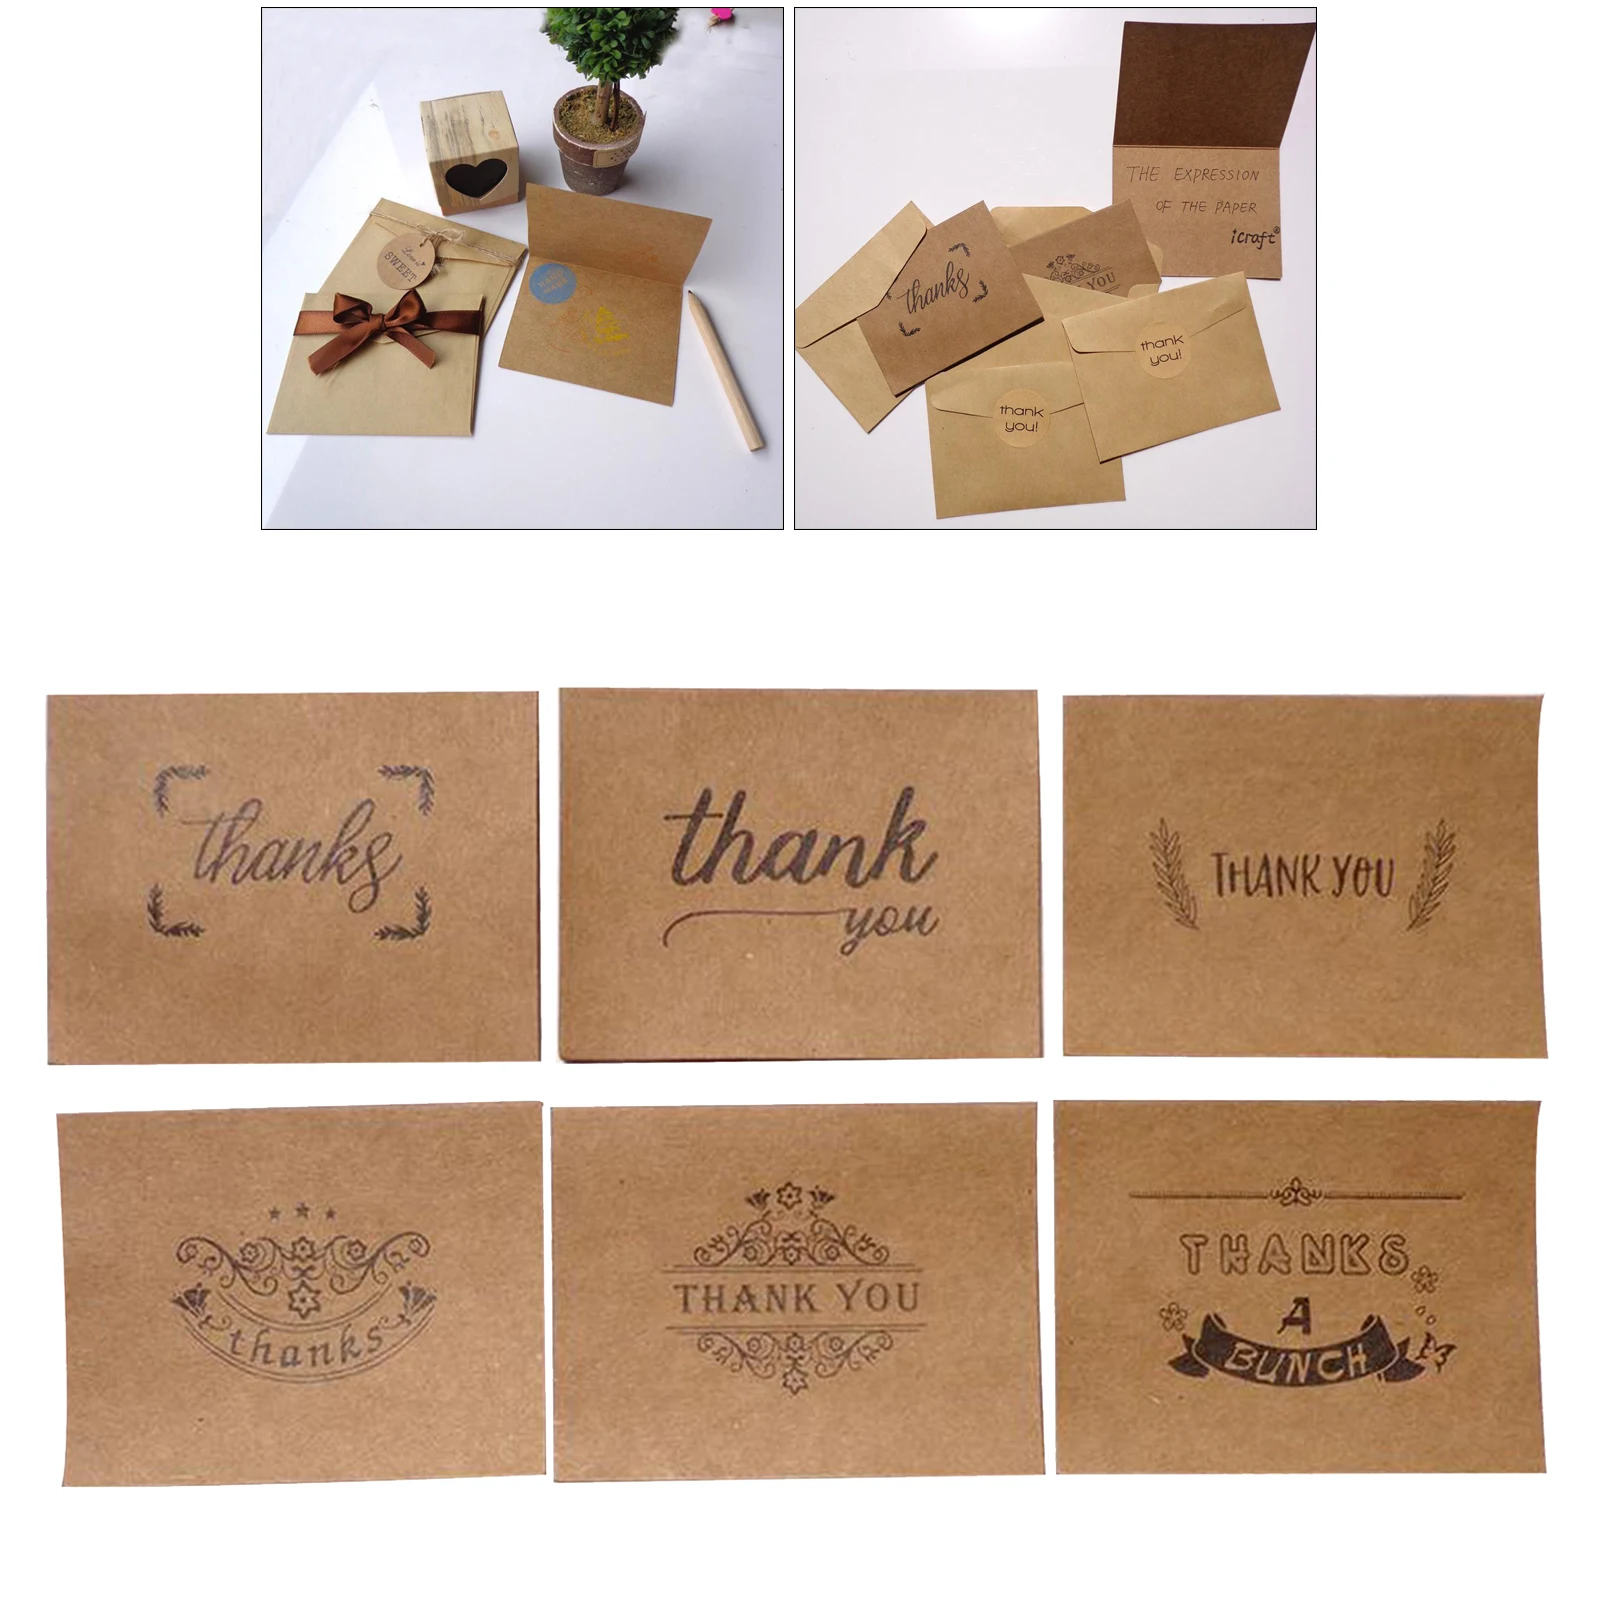 18-Pcs Blank Greeting Cards - Plain Cardstock Folded , Standard Straight Corners, Envelopes Included 4 x 6 Inches